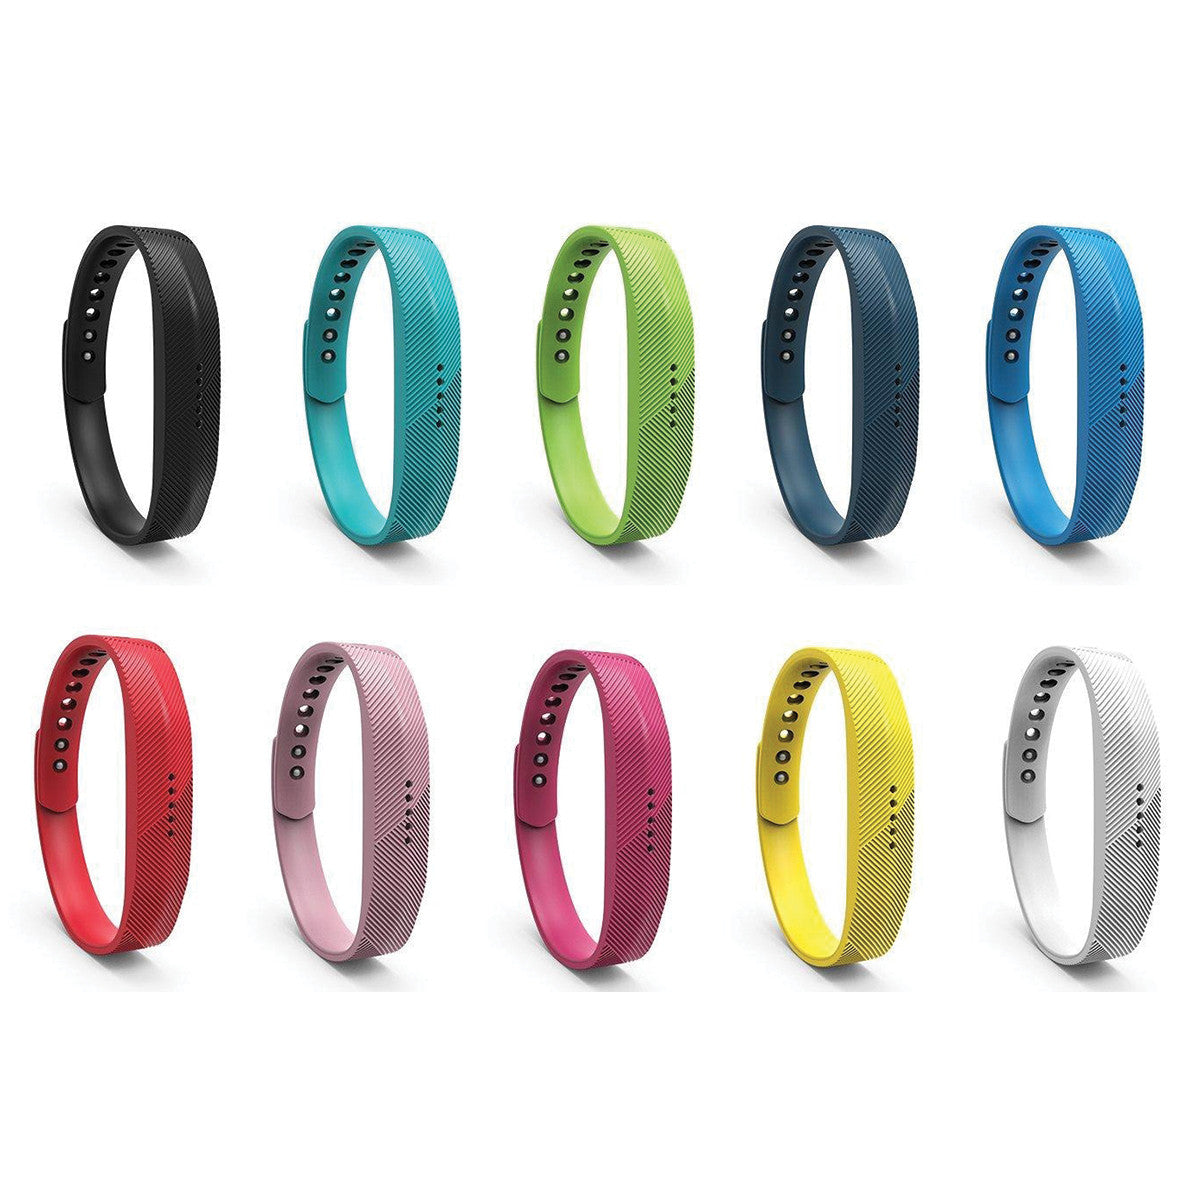 Set Of Replacement Clasps For Fitbit Flex Band 